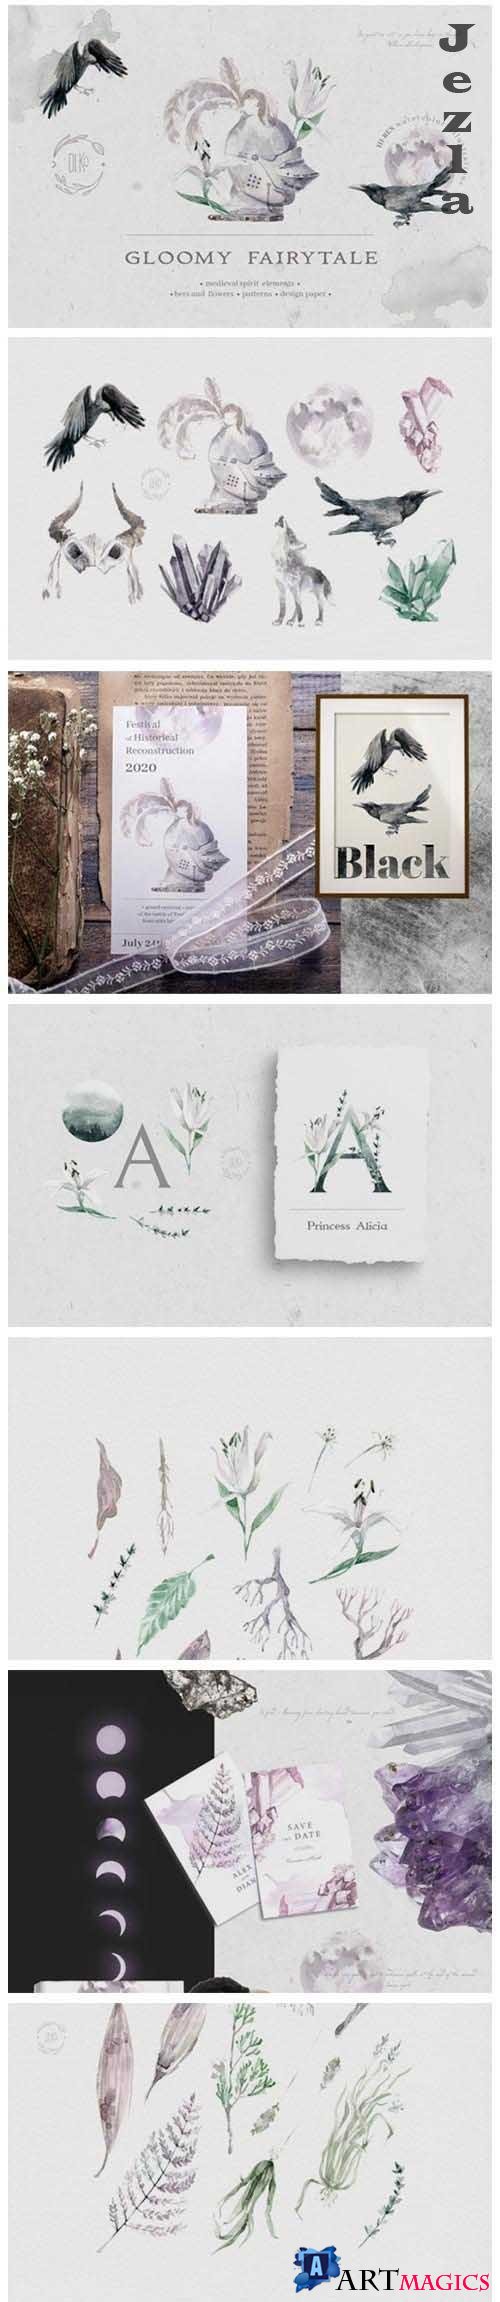 Gloomy fairytale graphic collection - 4569382